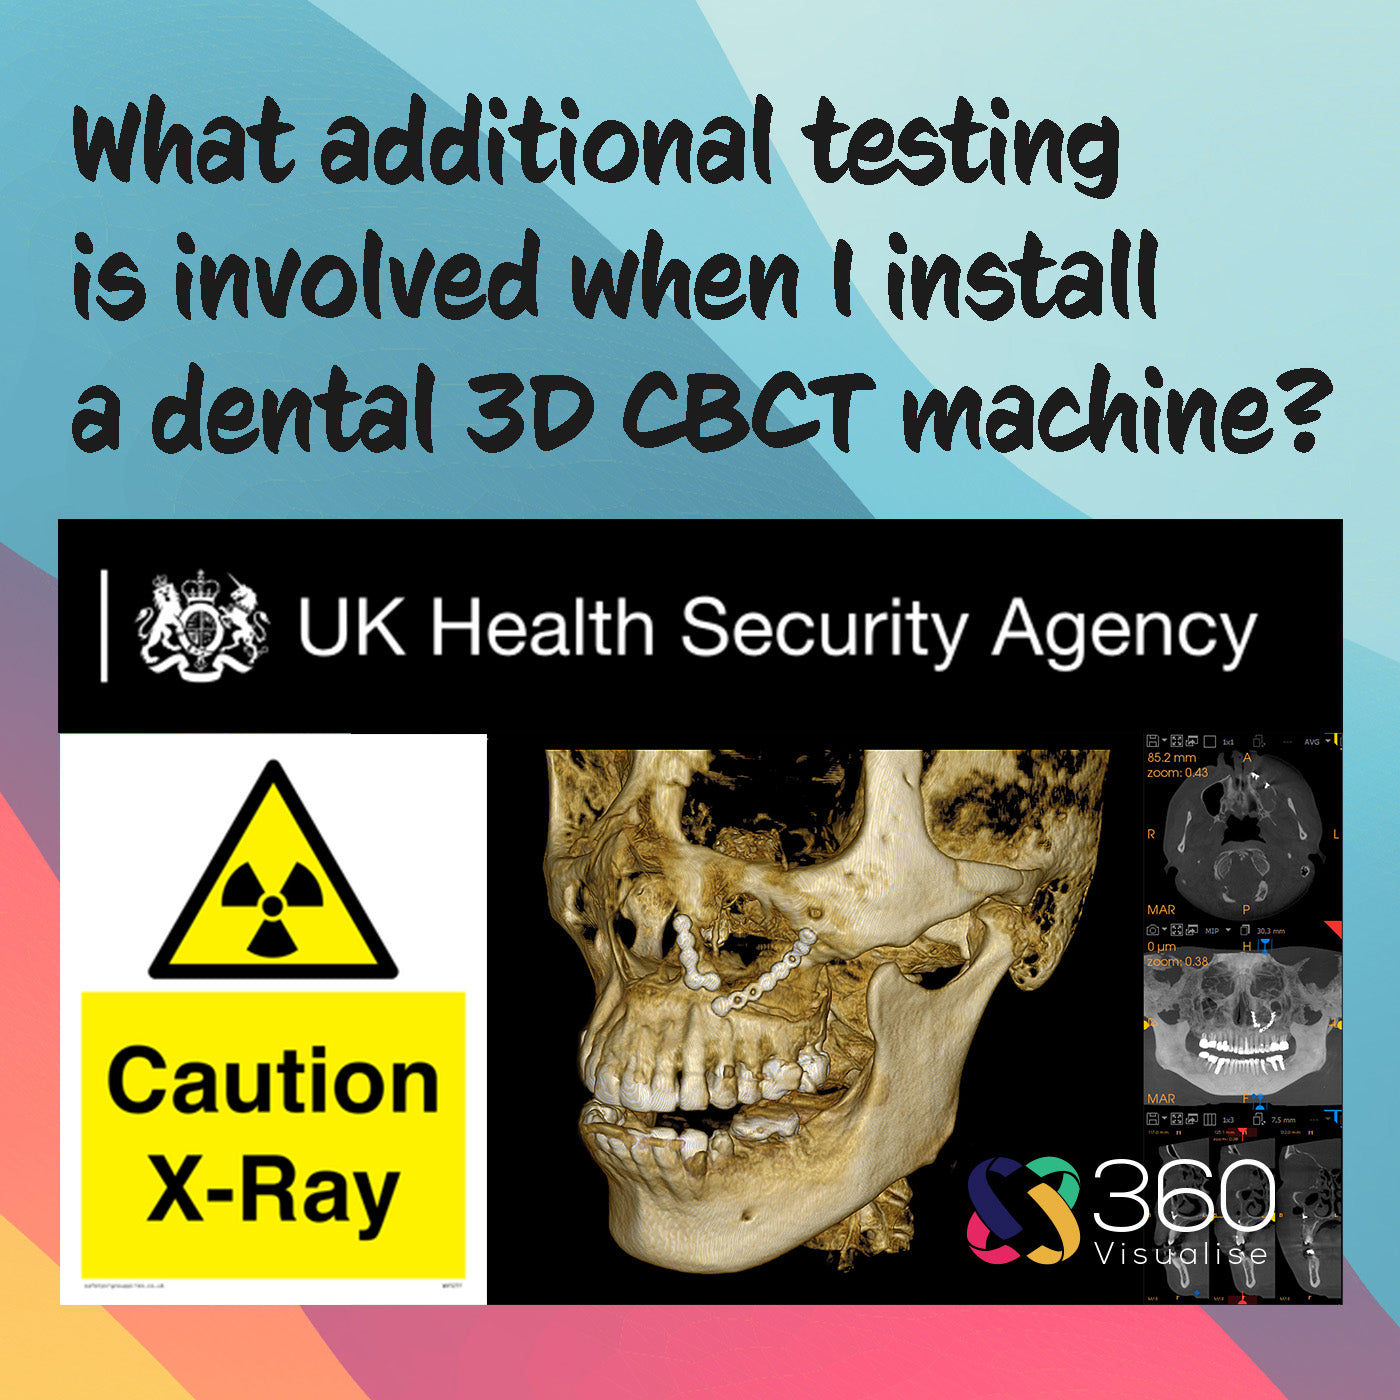 Preparation and planning for a dental CBCT machine